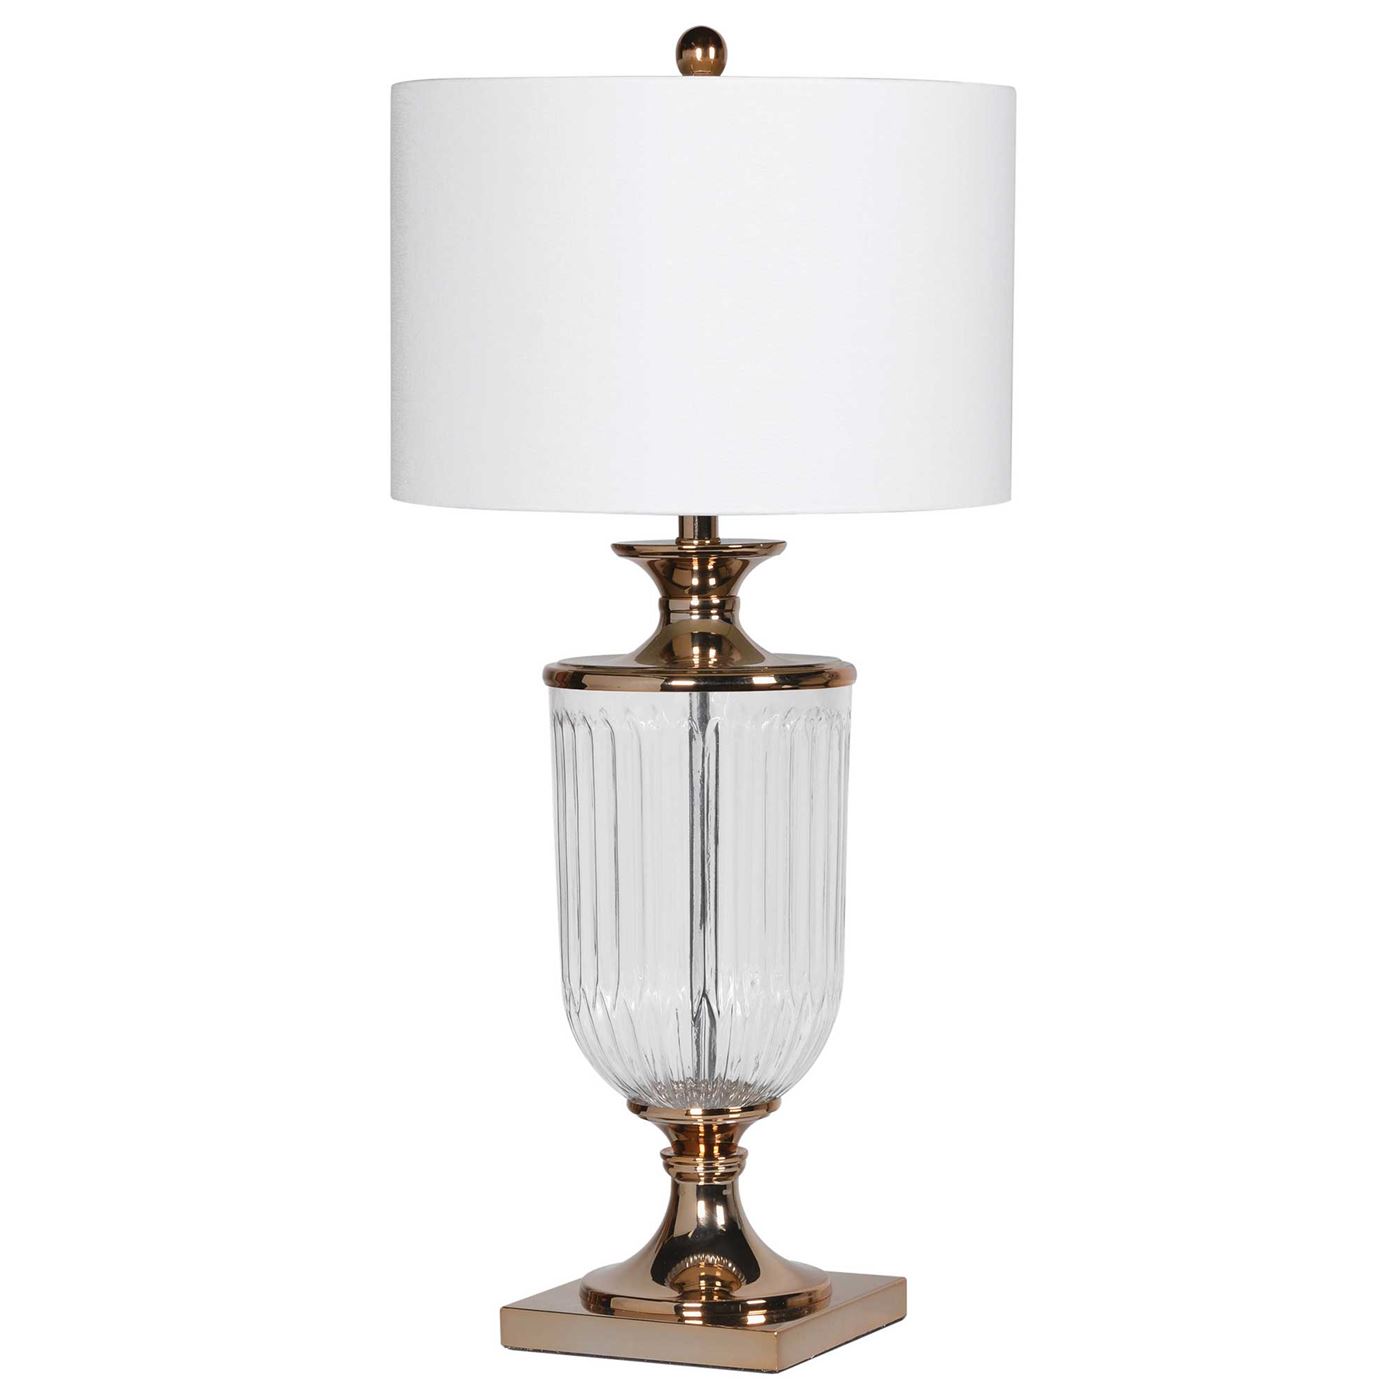 Iron Glass Urn Table Lamp, Neutral | Barker & Stonehouse